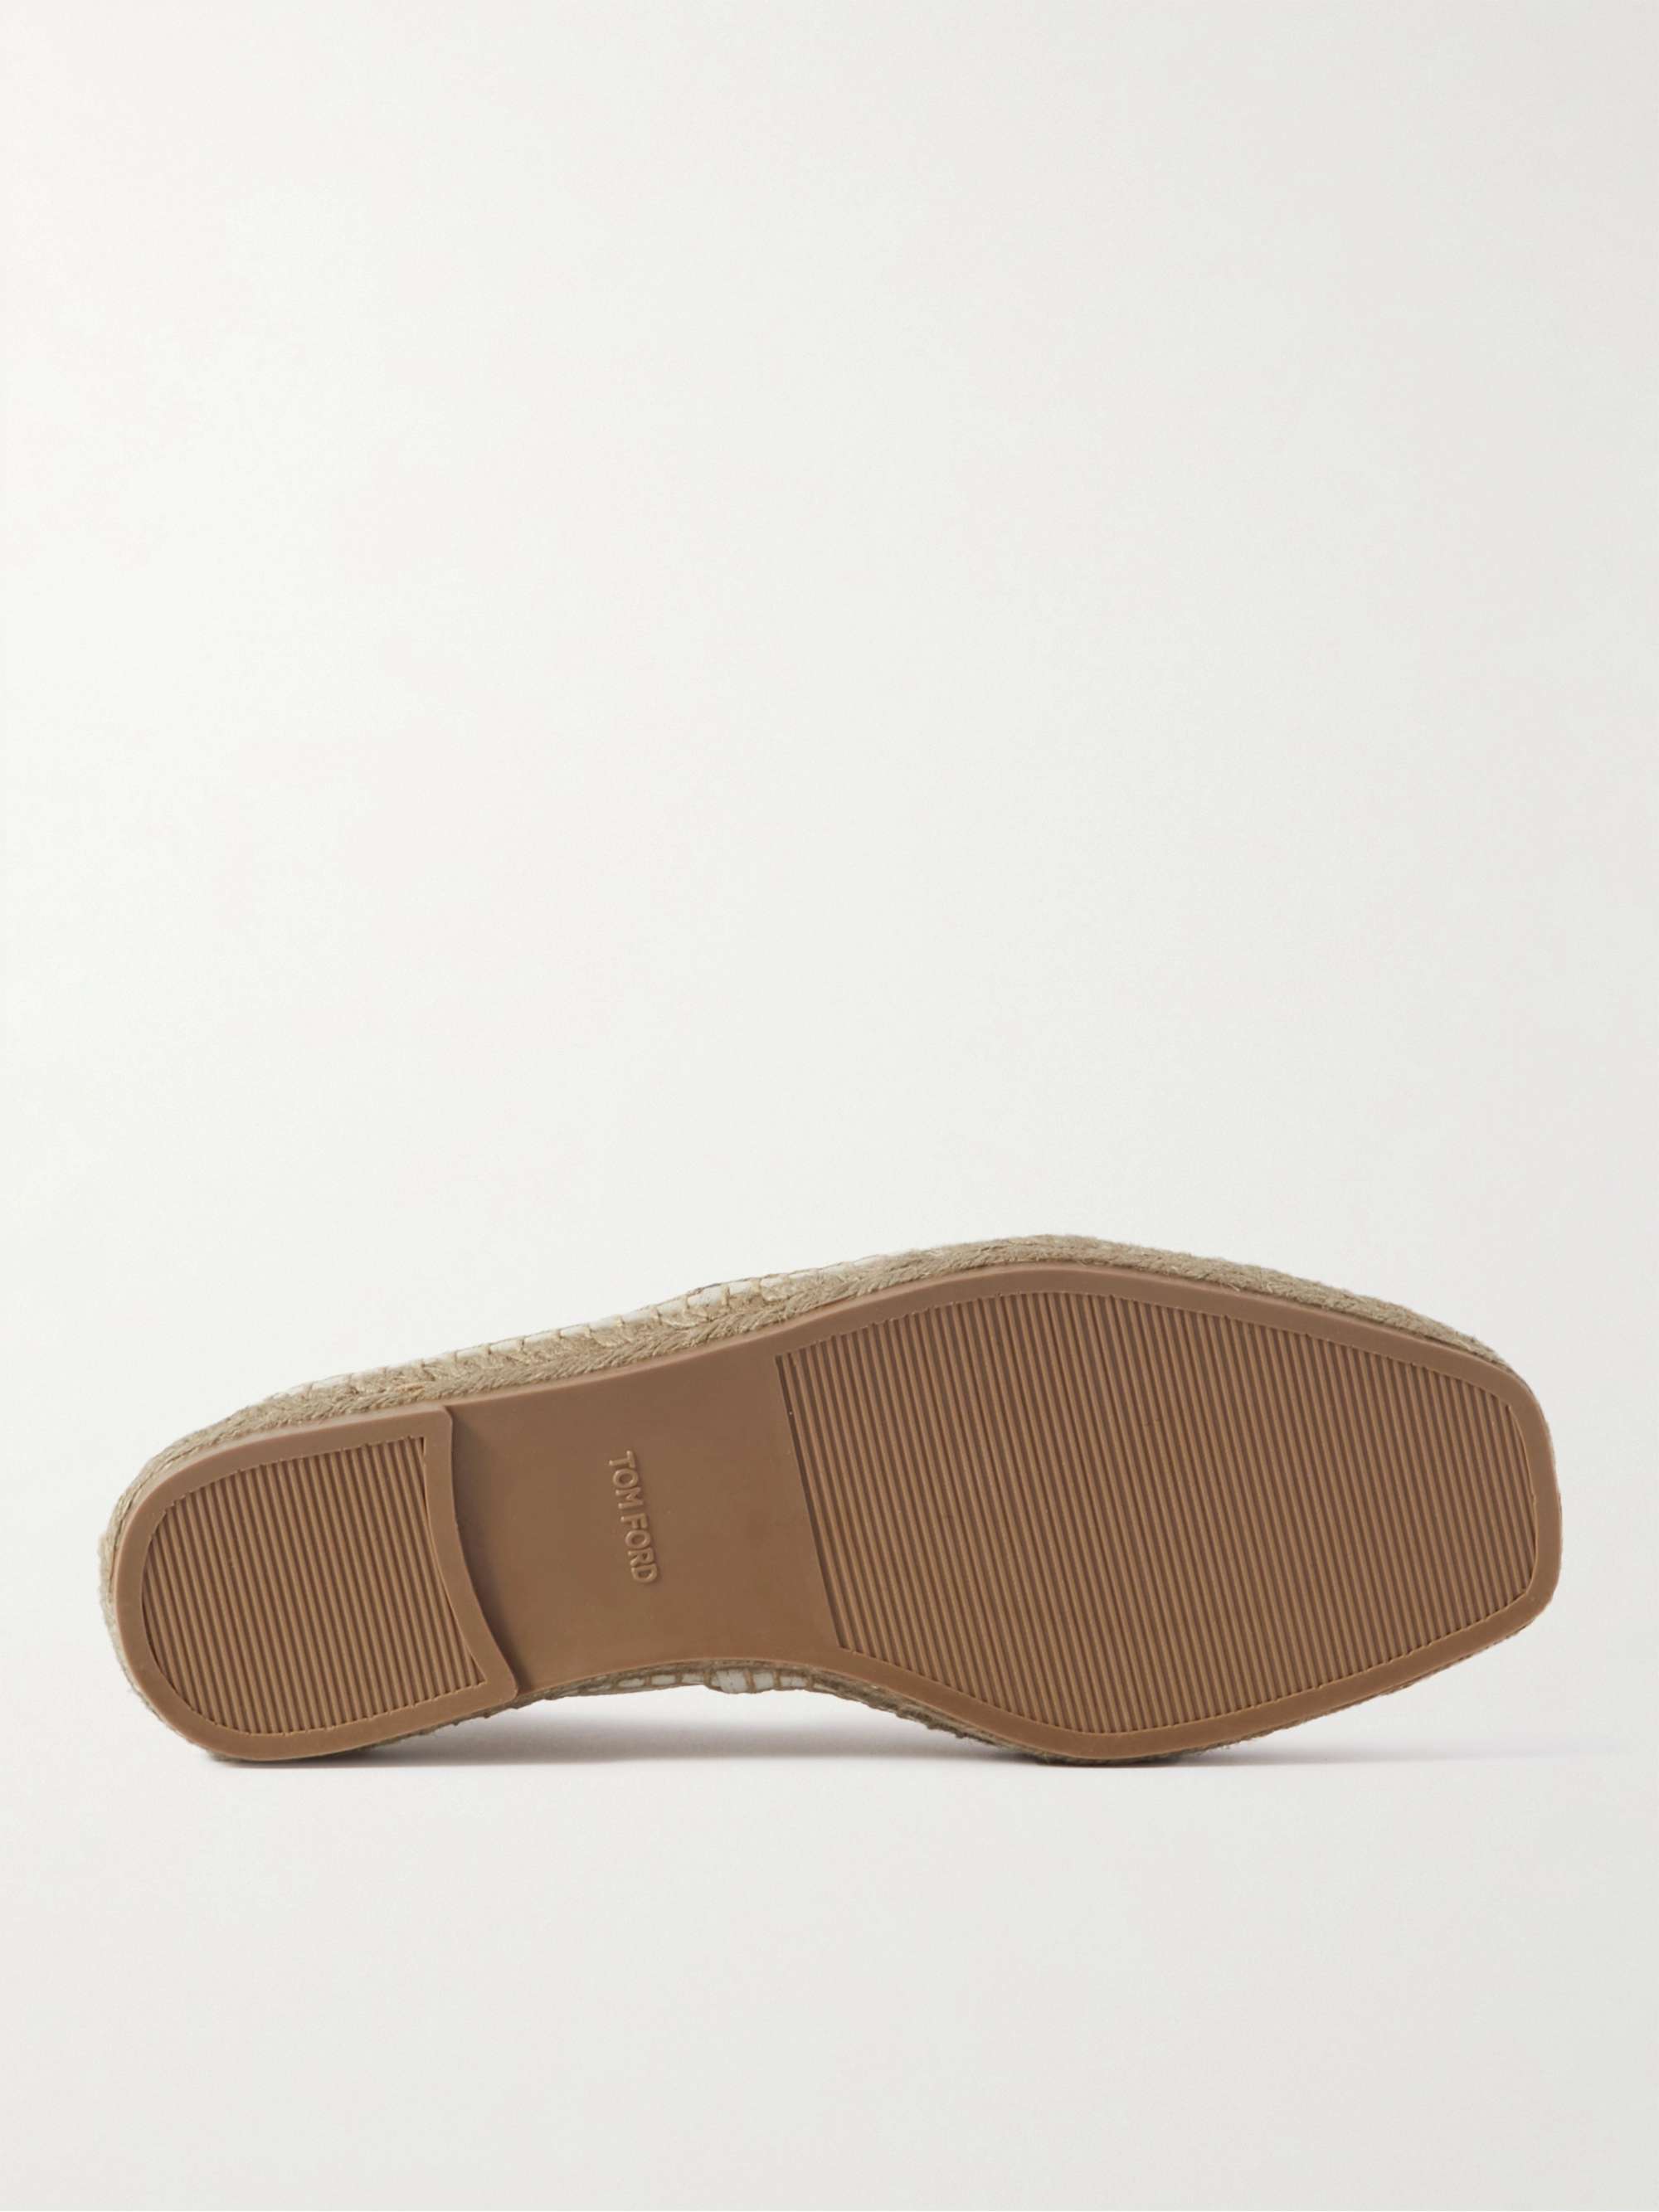 TOM FORD Barnes Textured-Leather Espadrilles